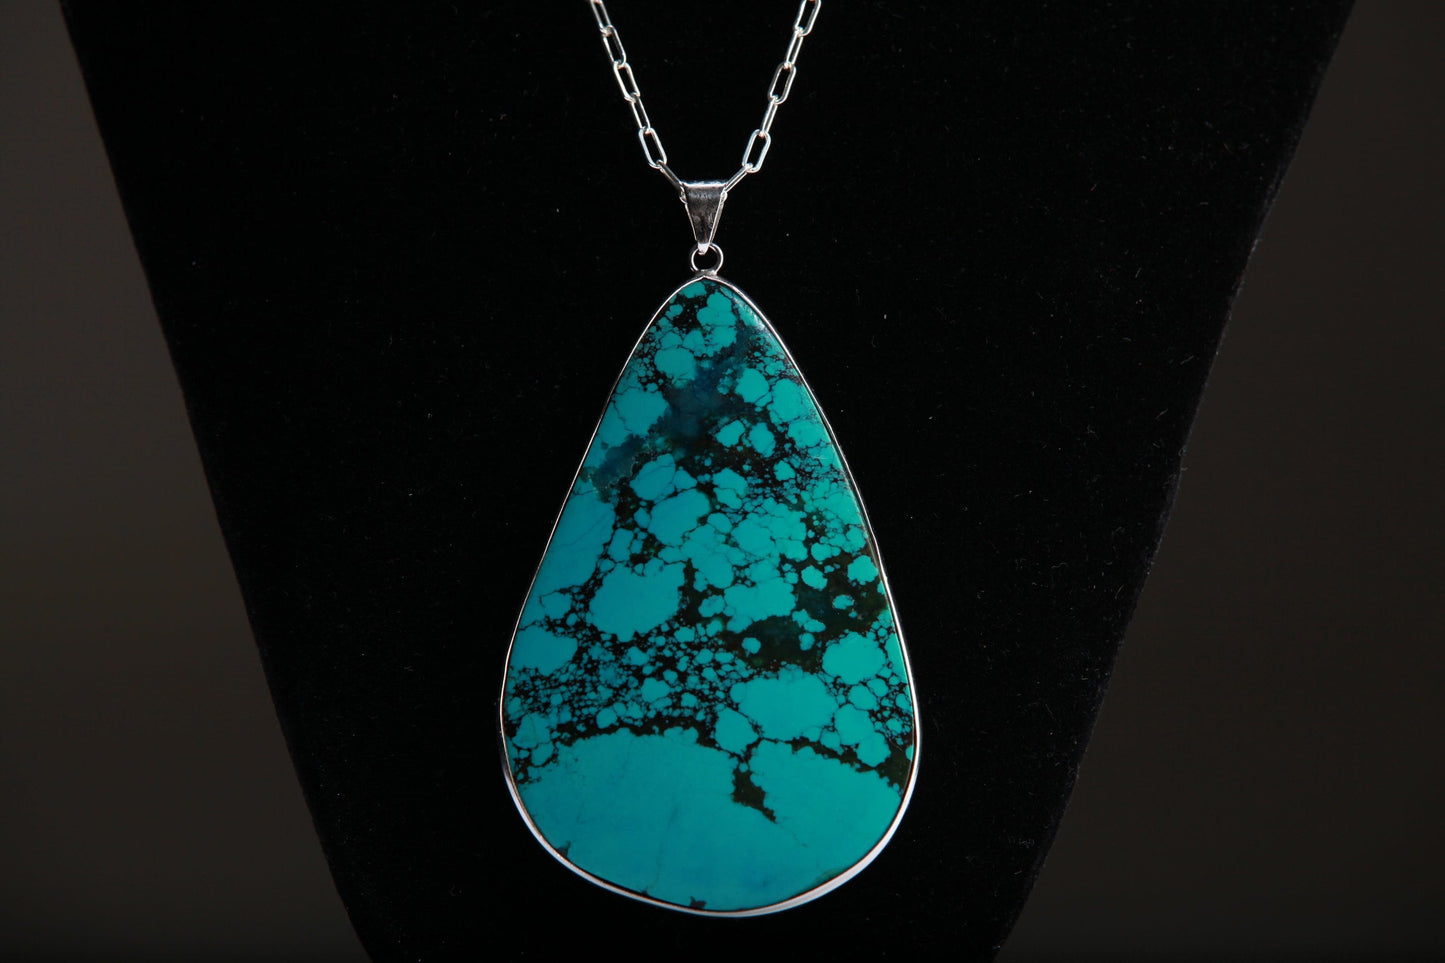 Genuine AAA Tibetan Spiderweb Turquoise Cab Gemstone 925 Sterling Silver Bezel Pendant Vintage Jewelry, Option: 925 Silver Chain,77x50mm 27g